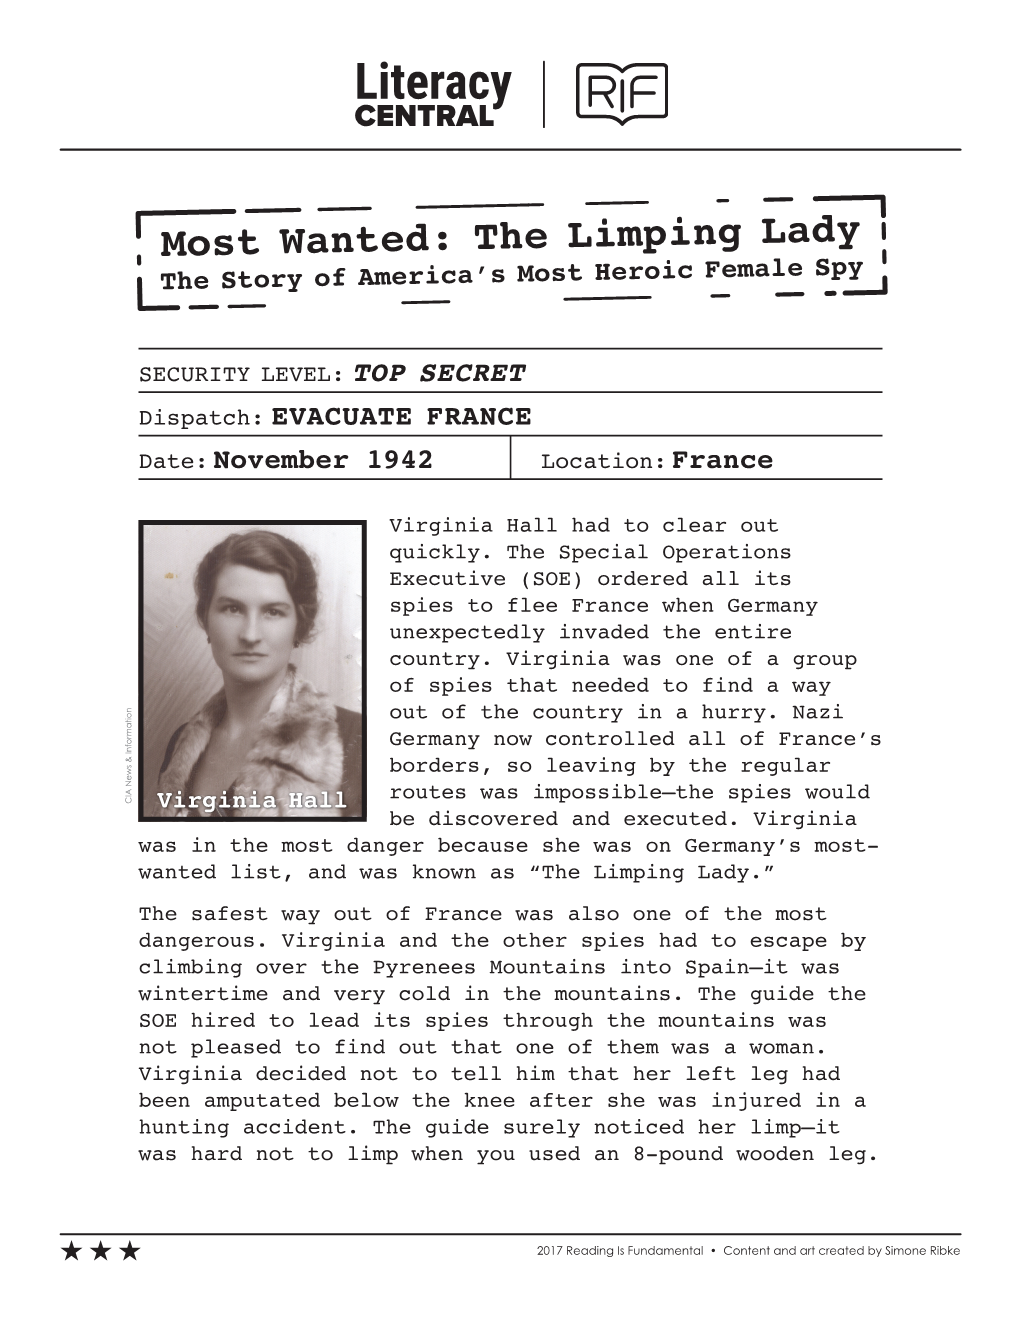 The Limping Lady the Story of America’S Most Heroic Female Spy